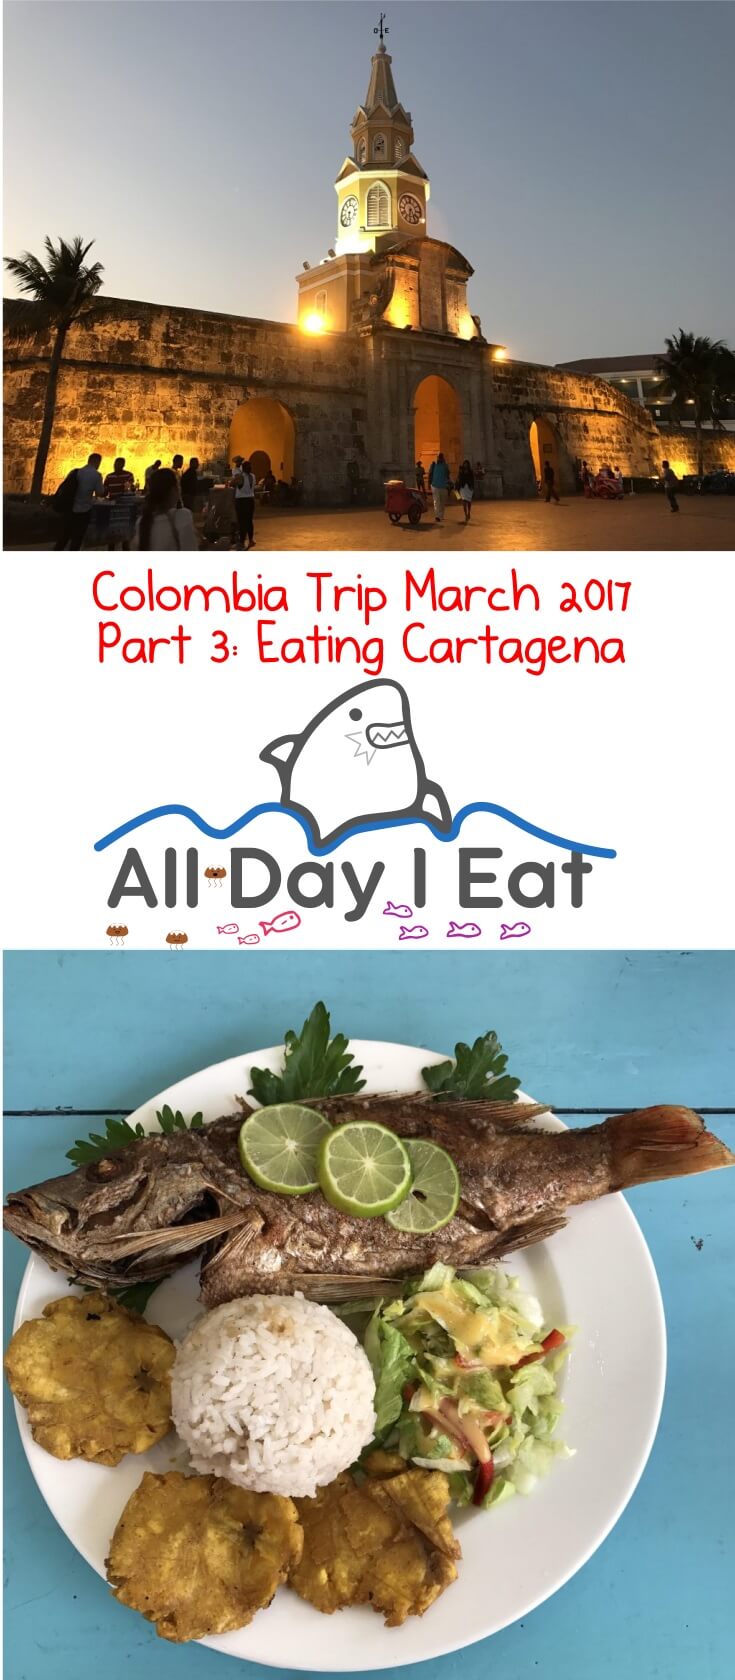 Colombia Trip March 2017 Part 3: Eating Cartagena. One of my favorite Colombian cities with delicious food! | www.alldayieat.com